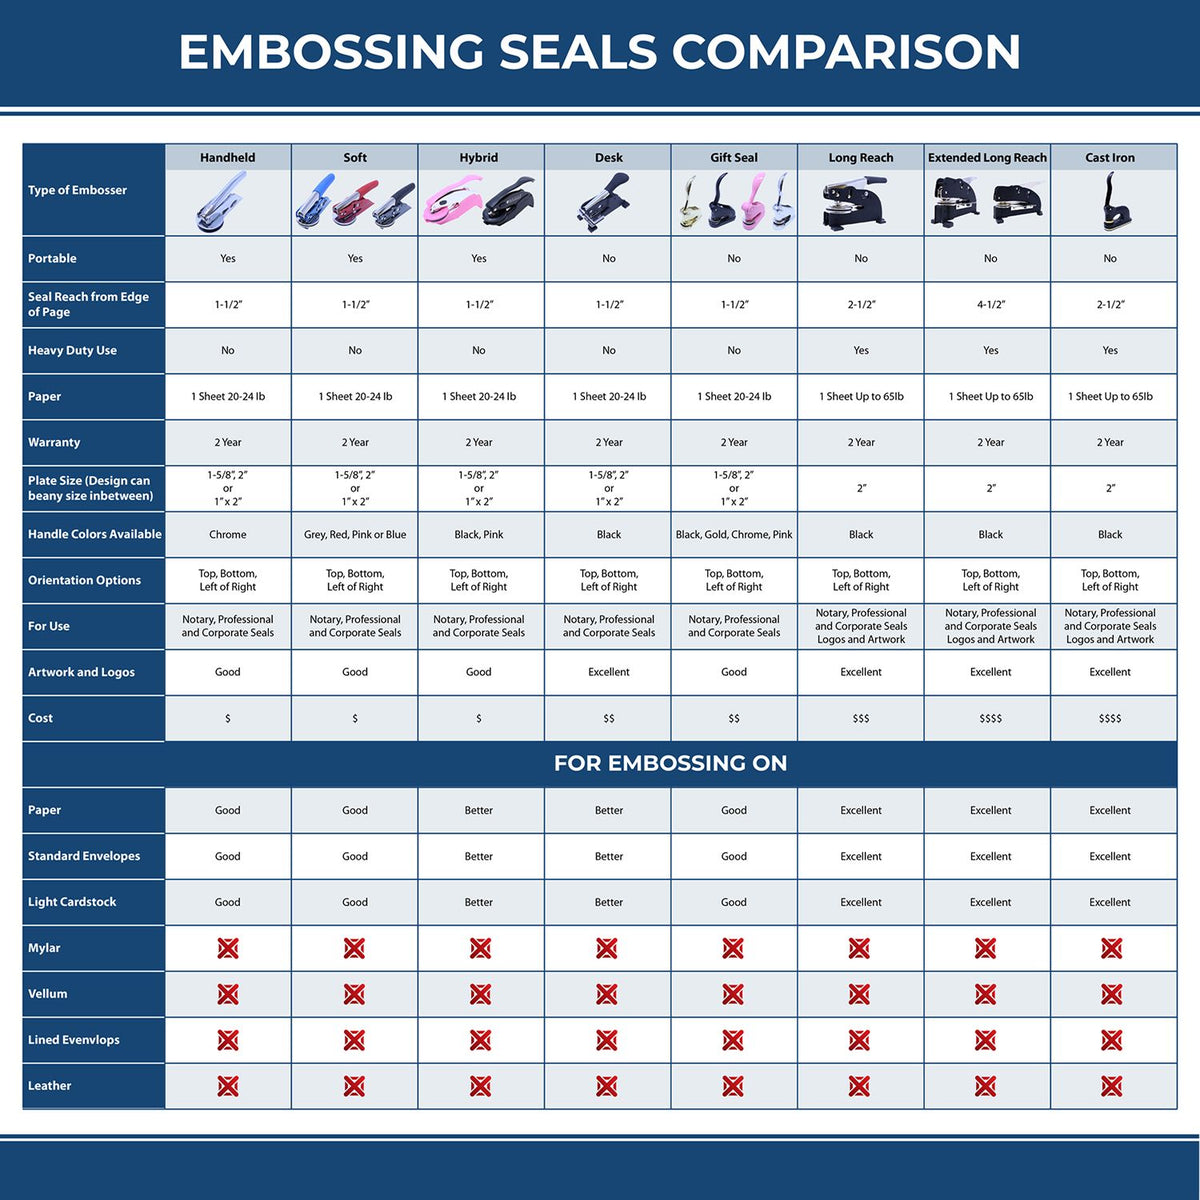 A comparison chart for the different types of mount models available for the Heavy Duty Cast Iron Alaska Geologist Seal Embosser